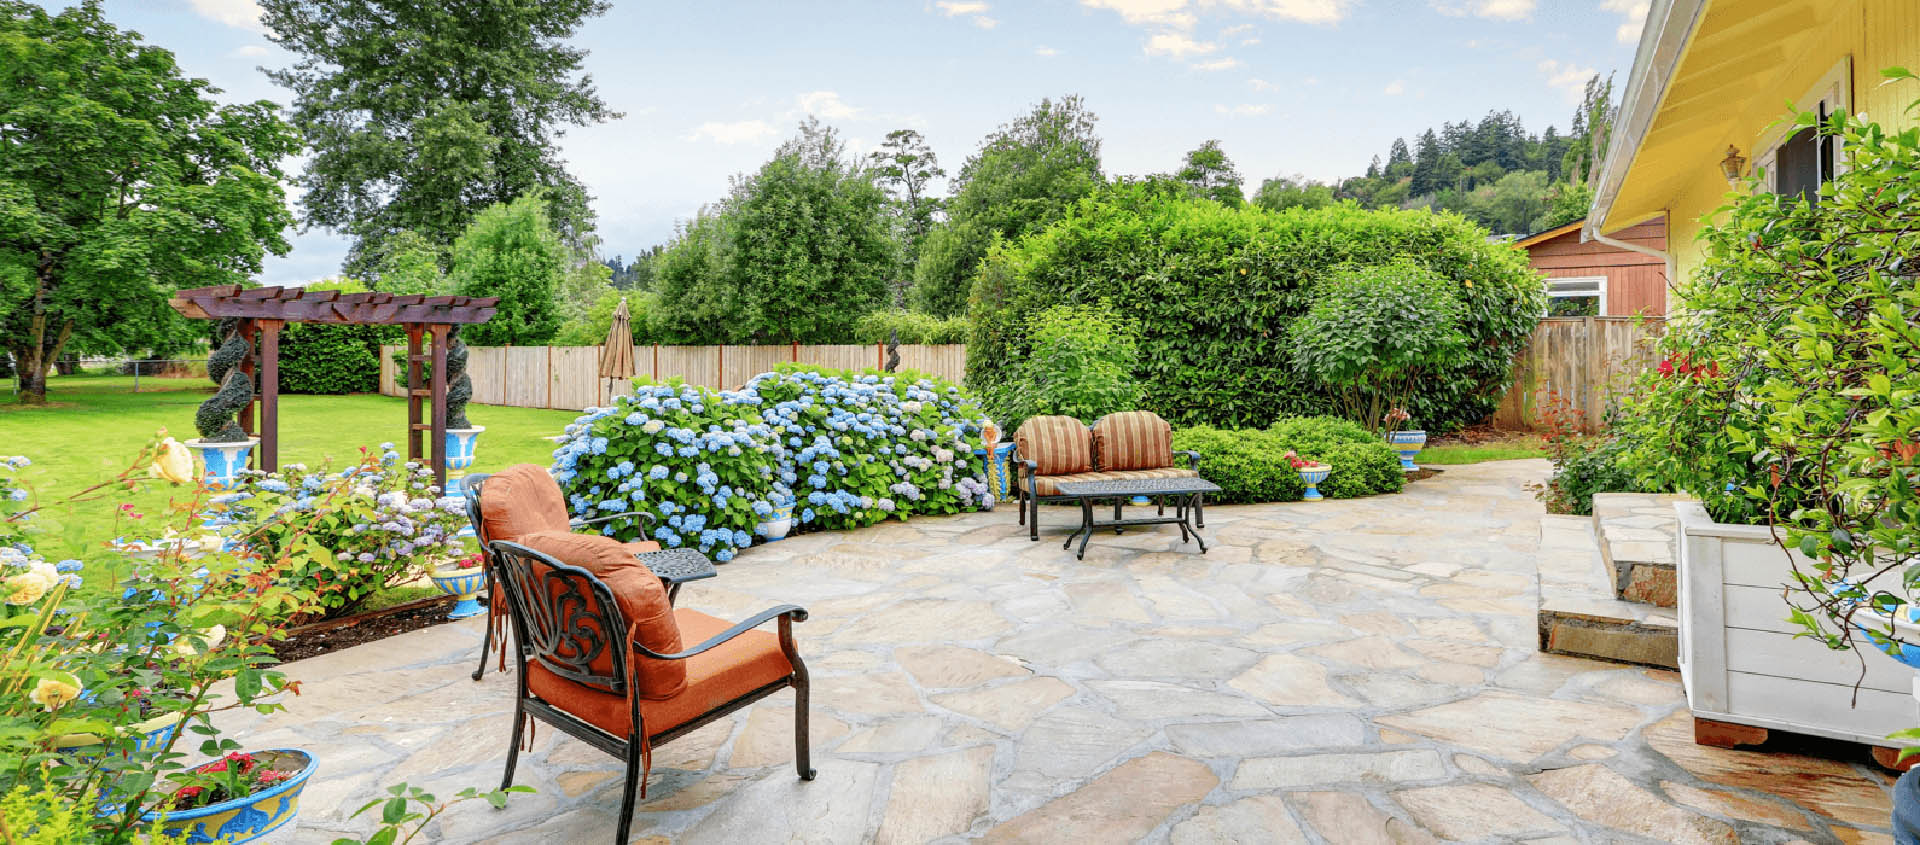 8 Tips for a Bug-Free Backyard Featured Image